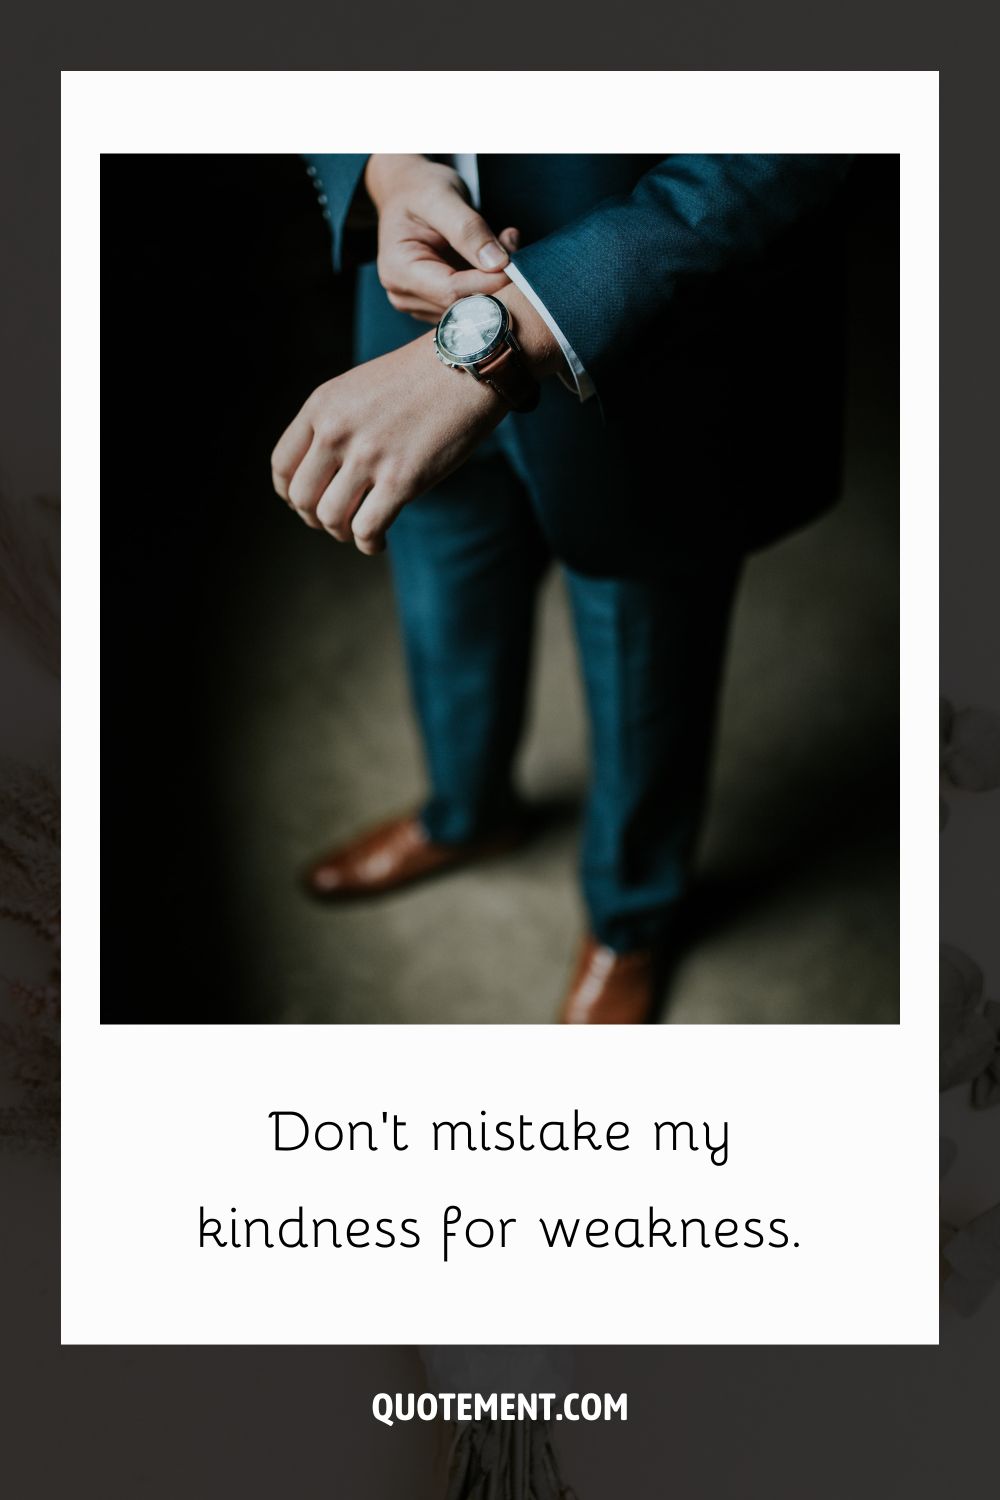 Image of a man in a suit wearing a watch representing a dope caption for guys.
